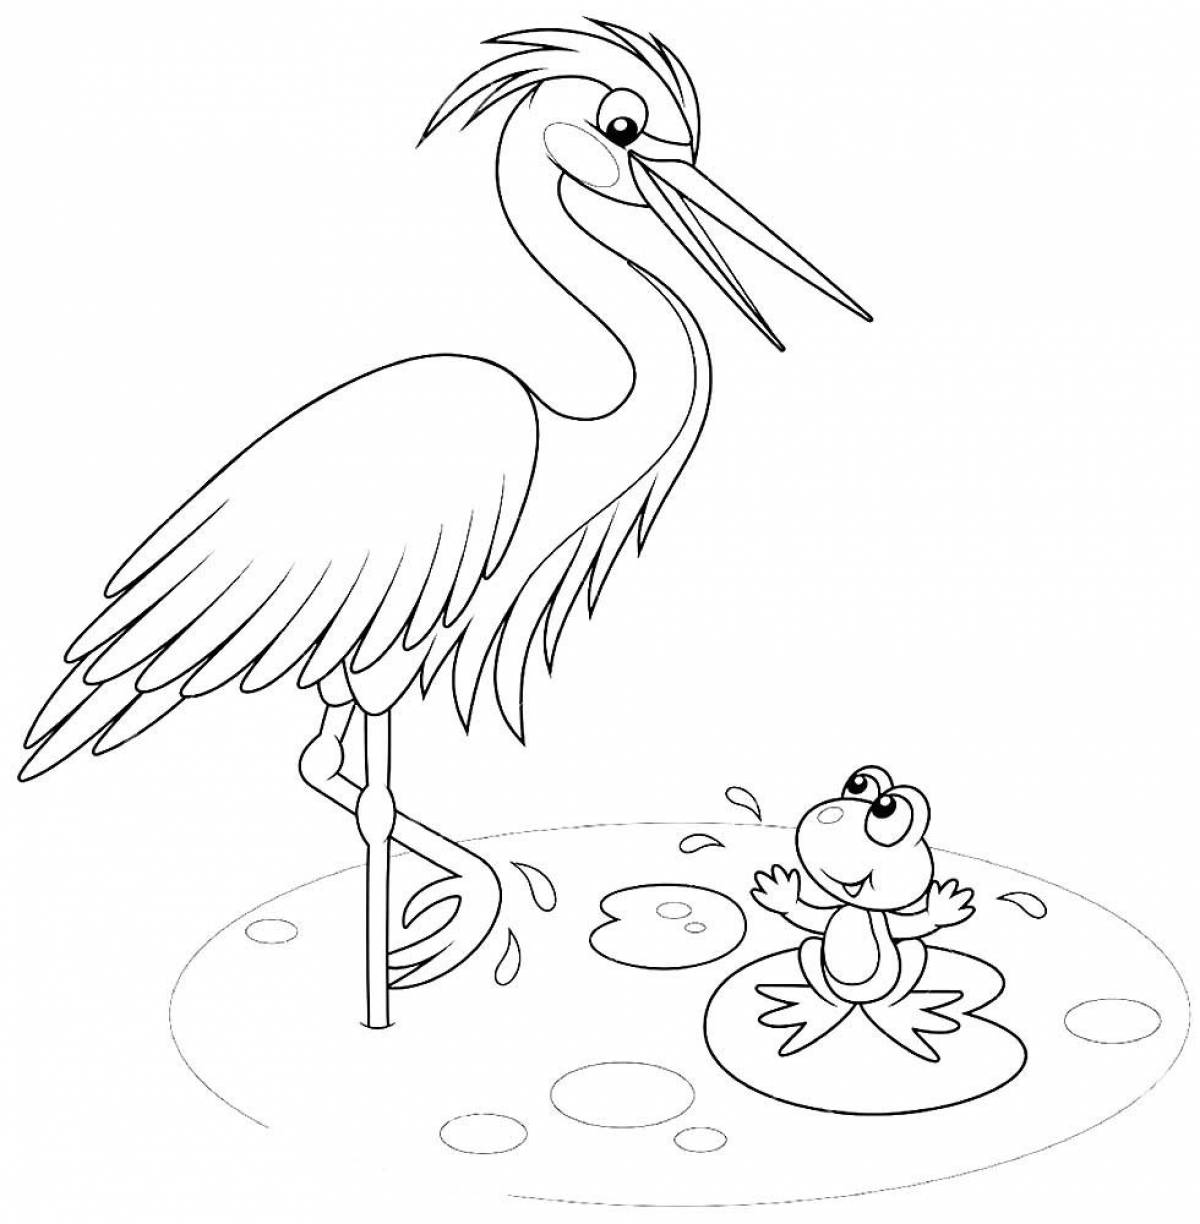 Zany heron coloring book for kids